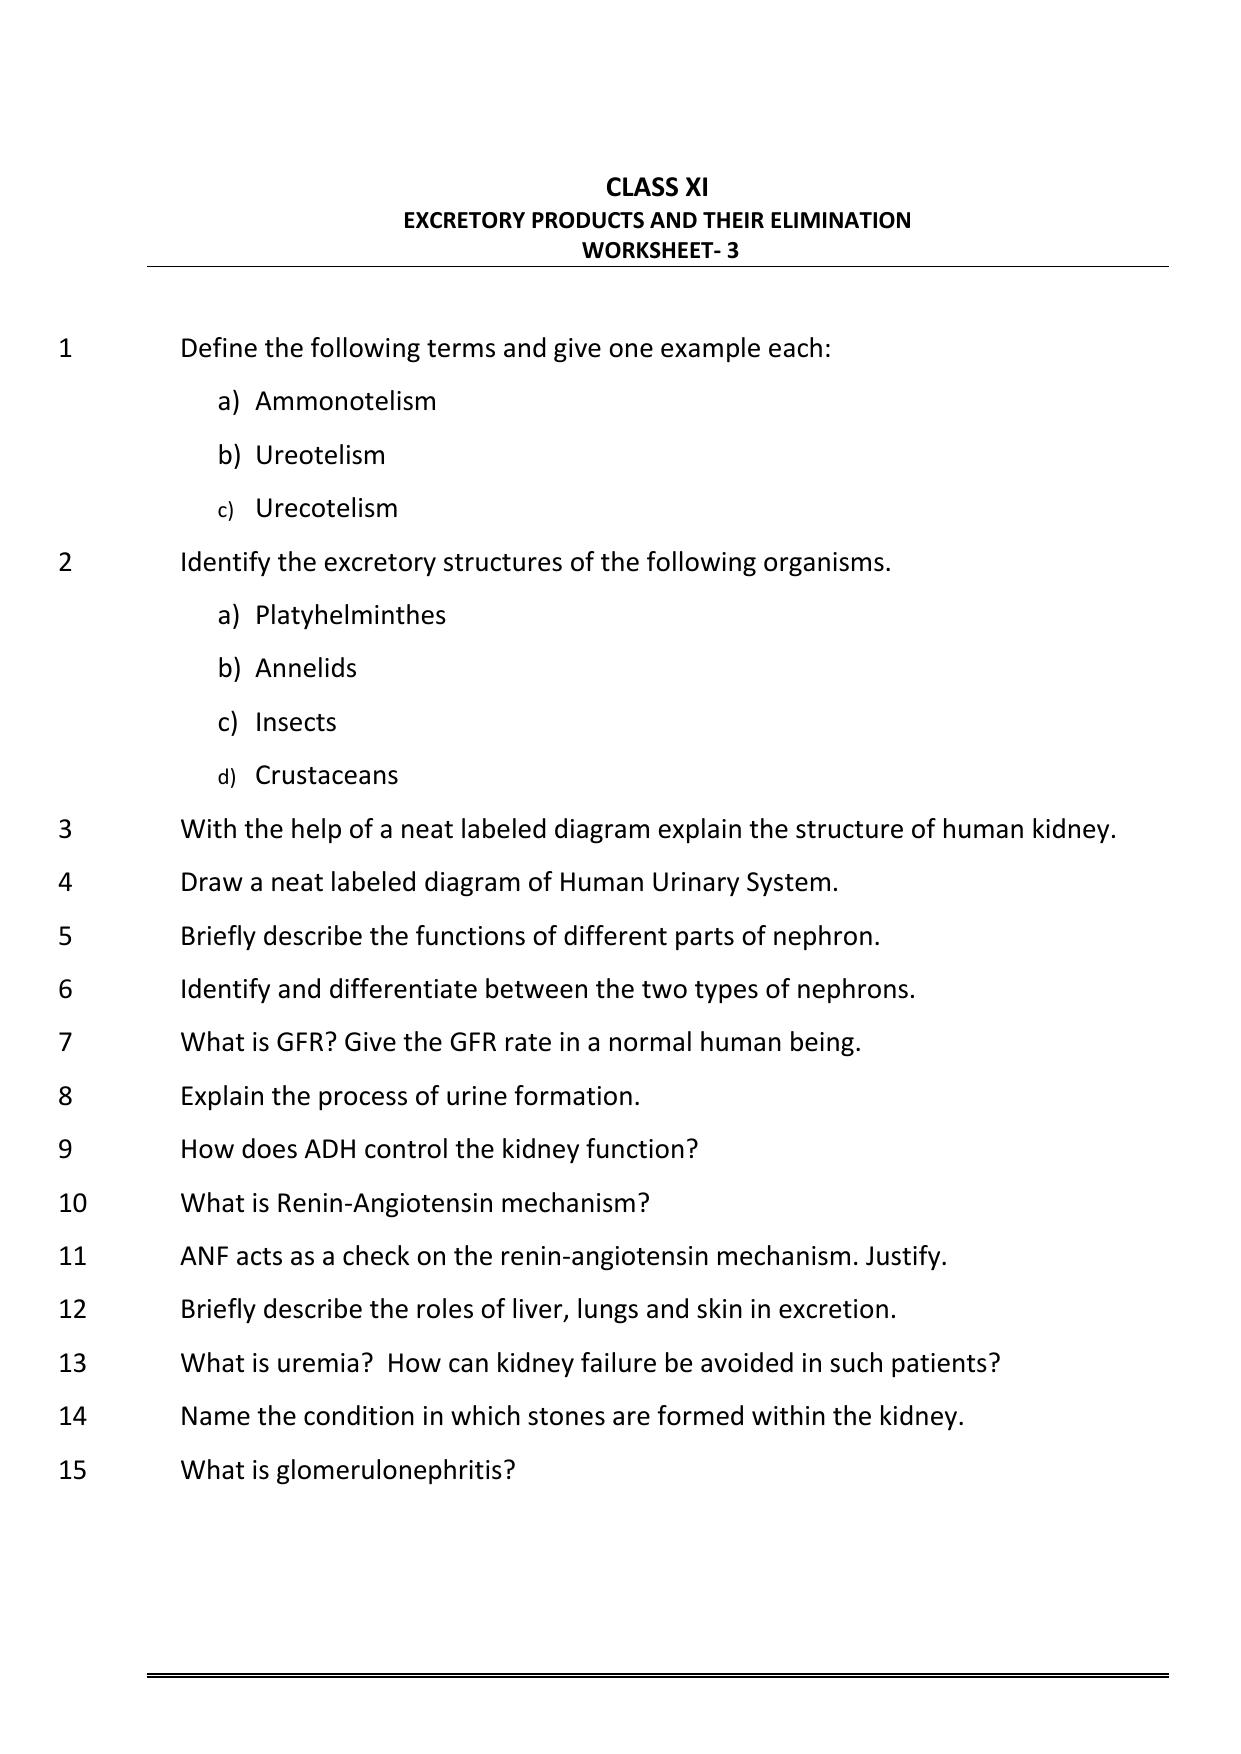 CBSE Worksheets for Class 11 Biology Excretory Products and Their Elimination Assignment - Page 1